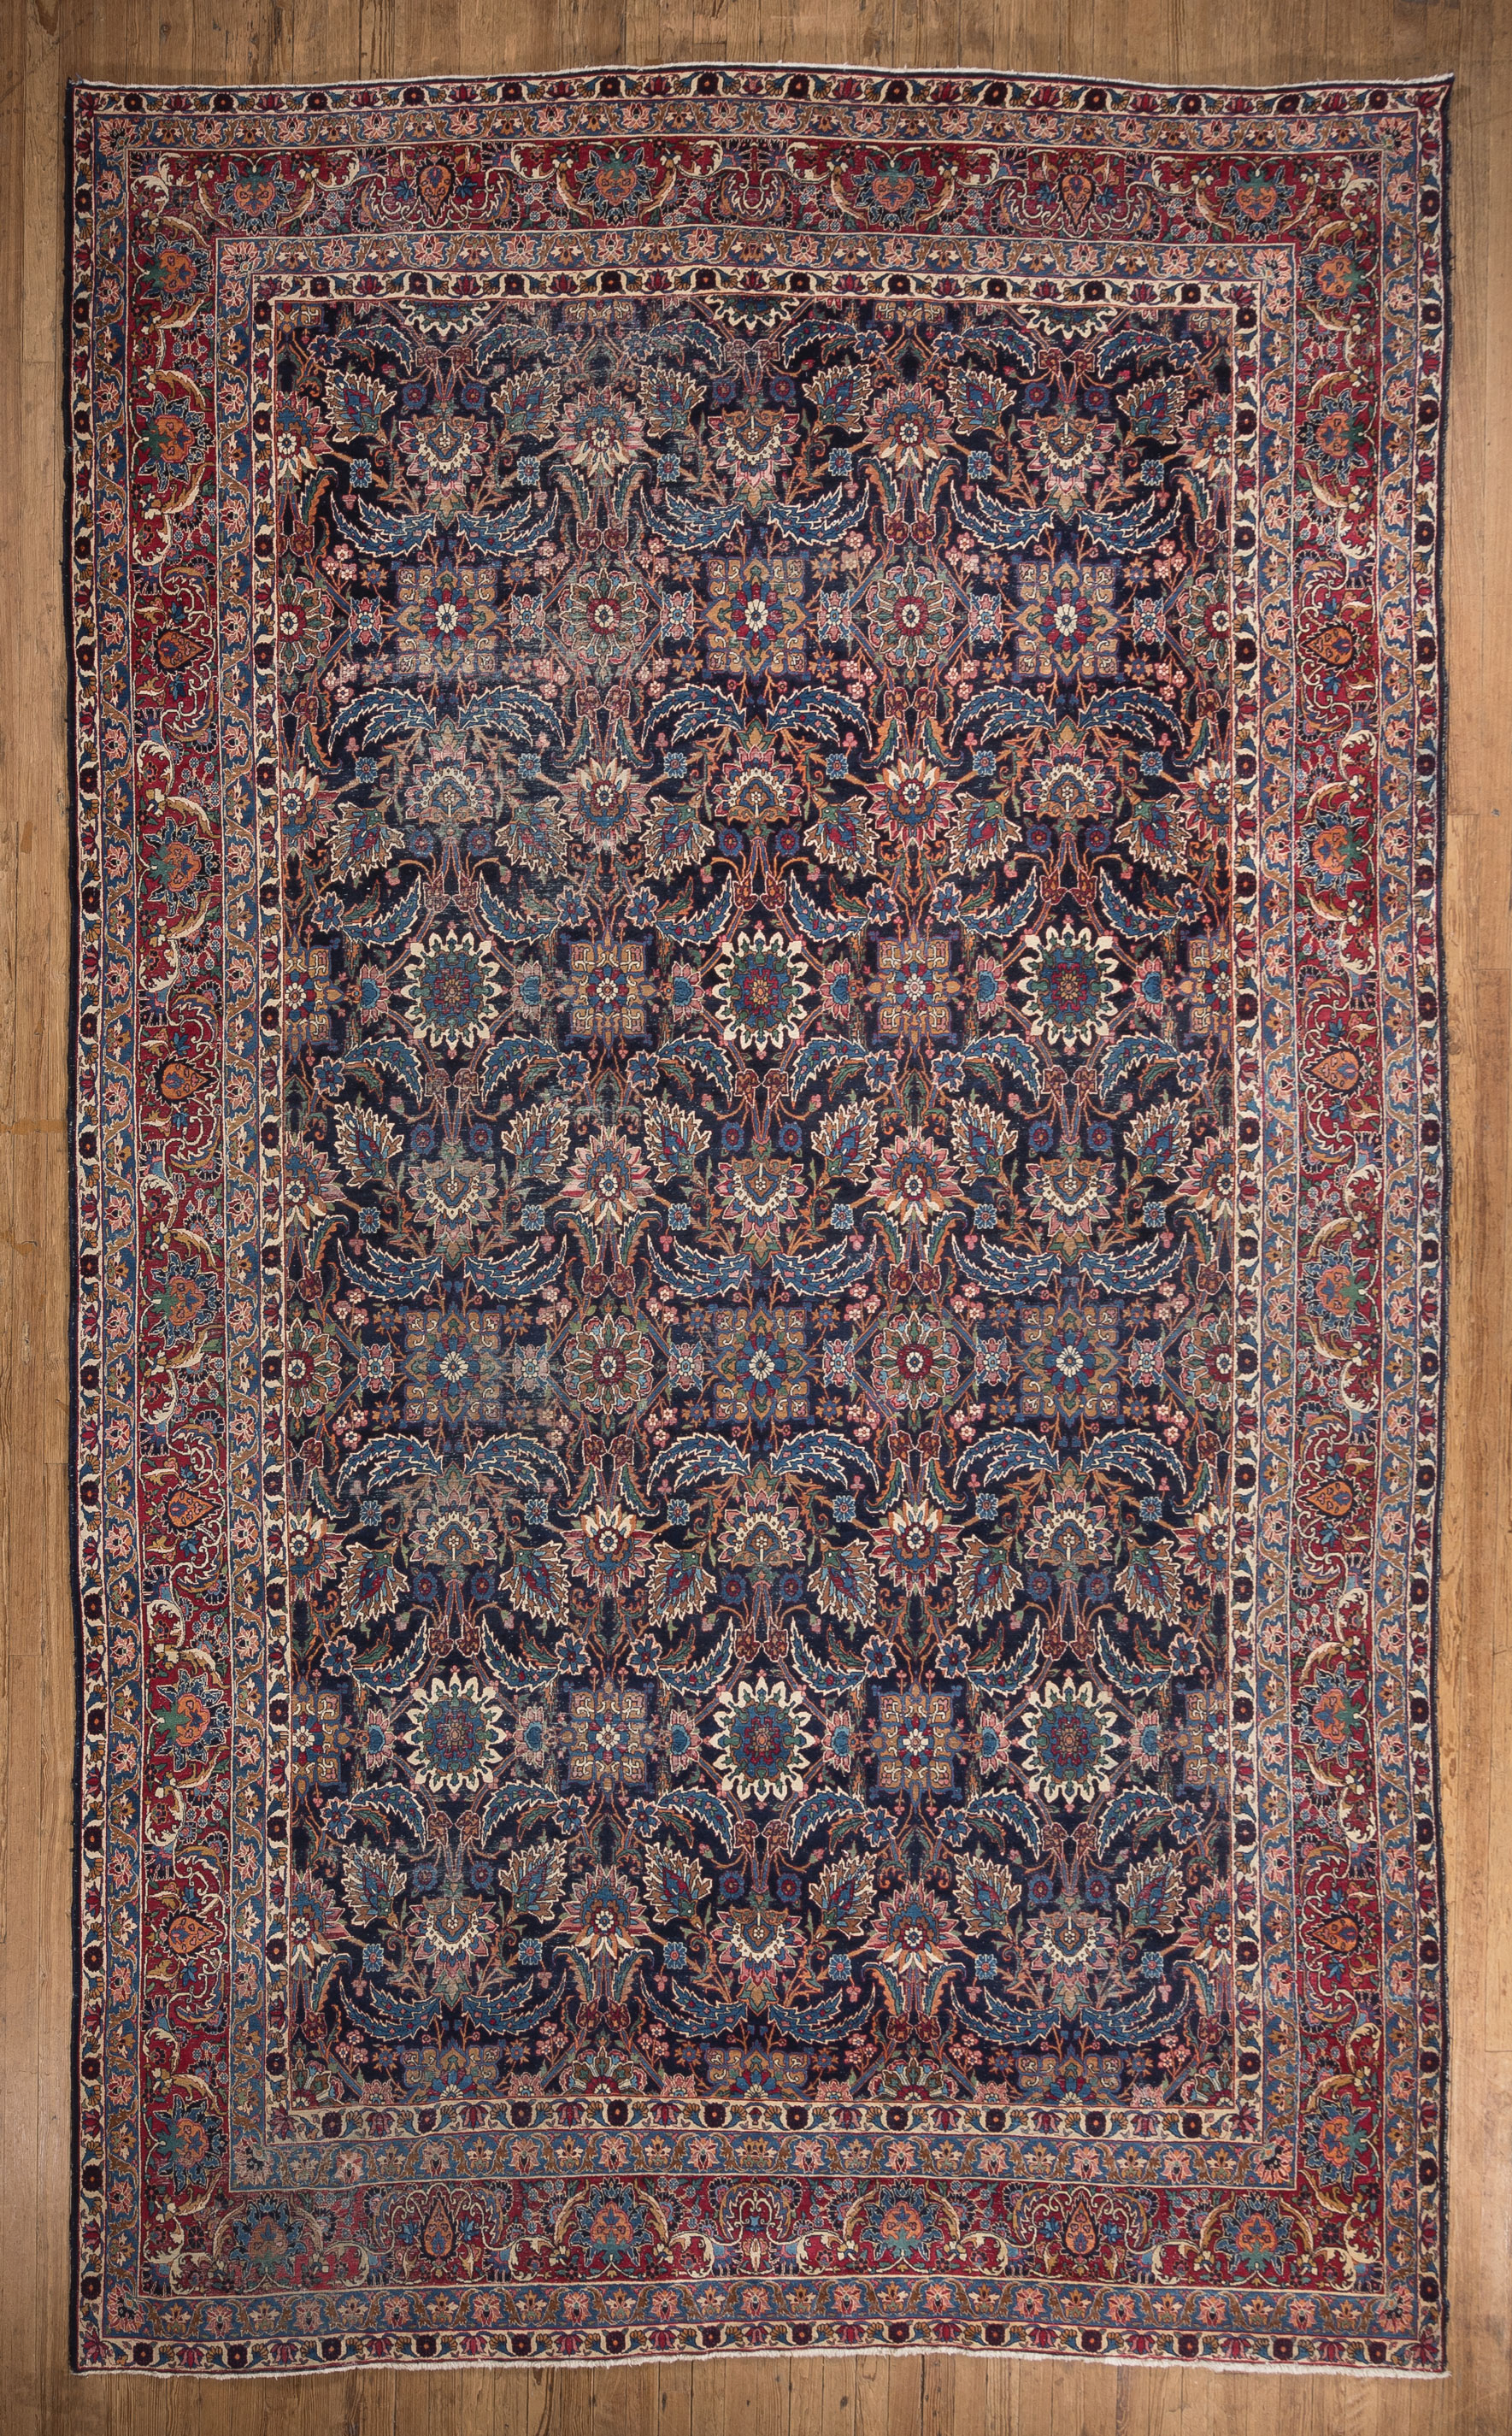 Persian Carpet , blue ground, red border, repeating design, 11 ft. 4 in. x 19 ft. 1 in